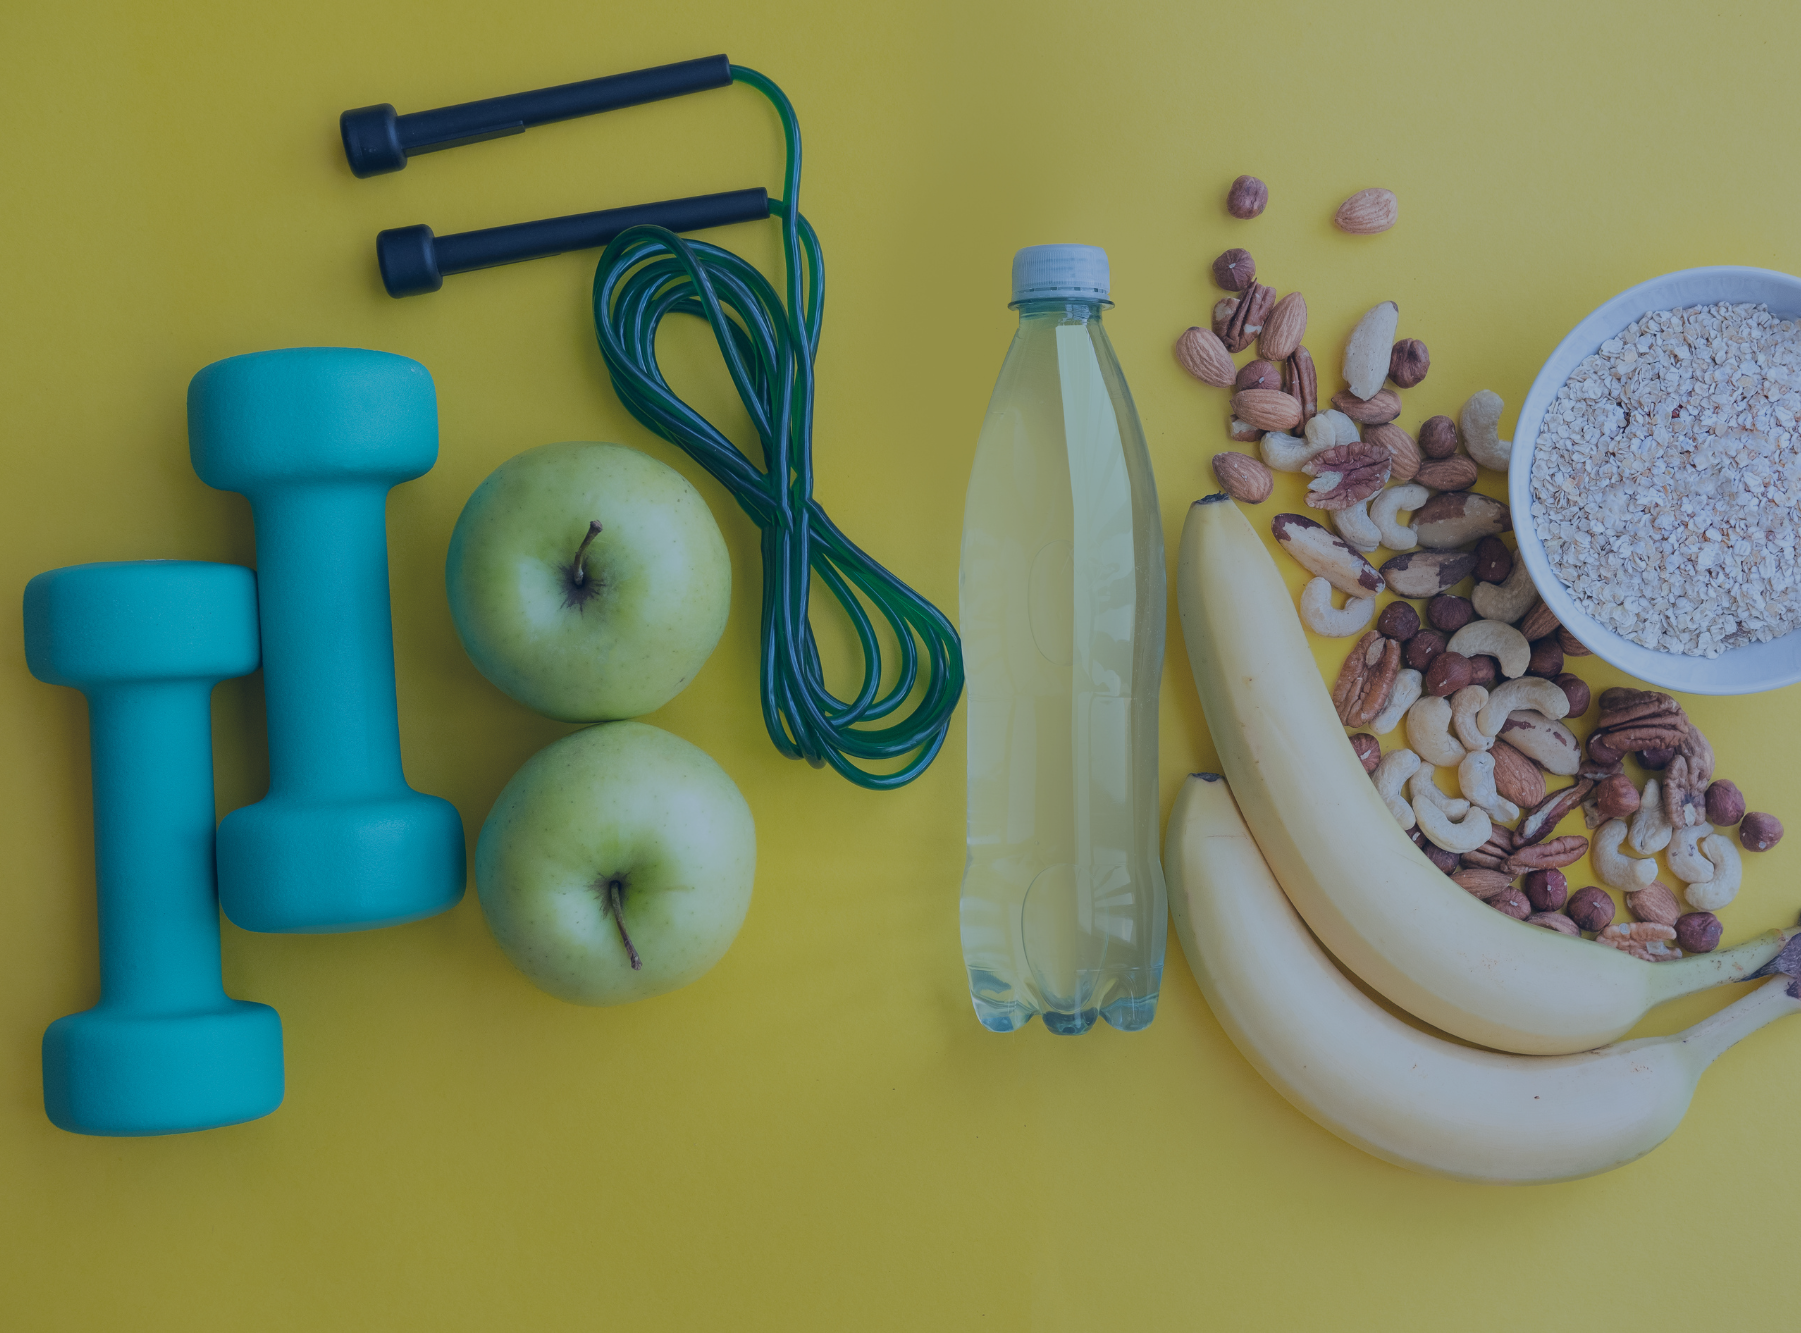 exercise equipment and healthy foods on a yellow background